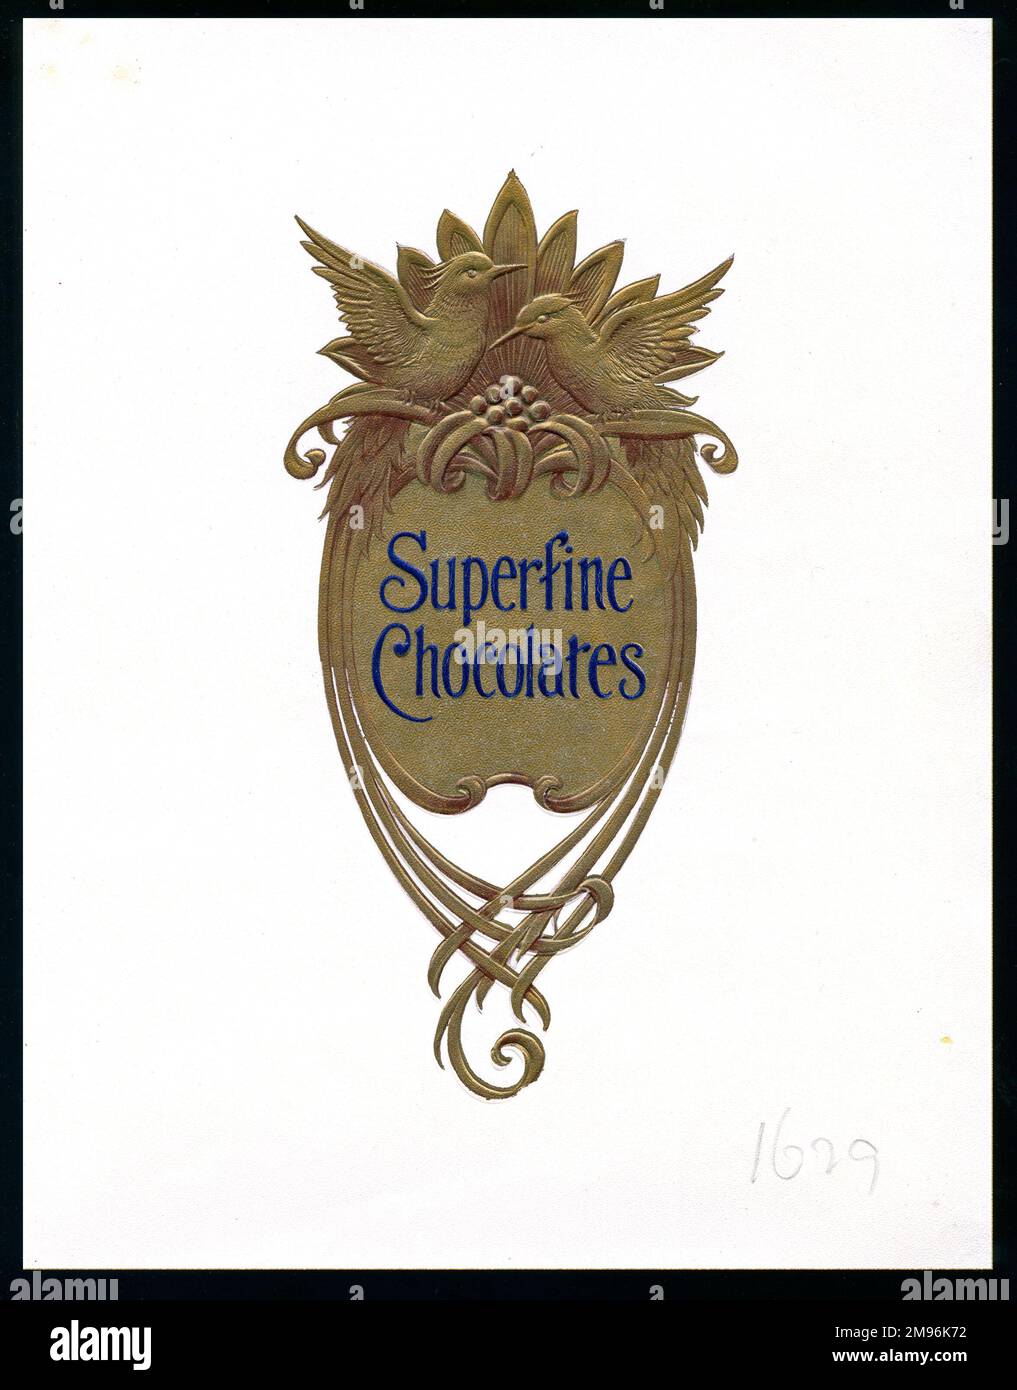 Chocolate box design, an almond shape in gold for Superfine Chocolates, with two birds and their nest above. Stock Photo